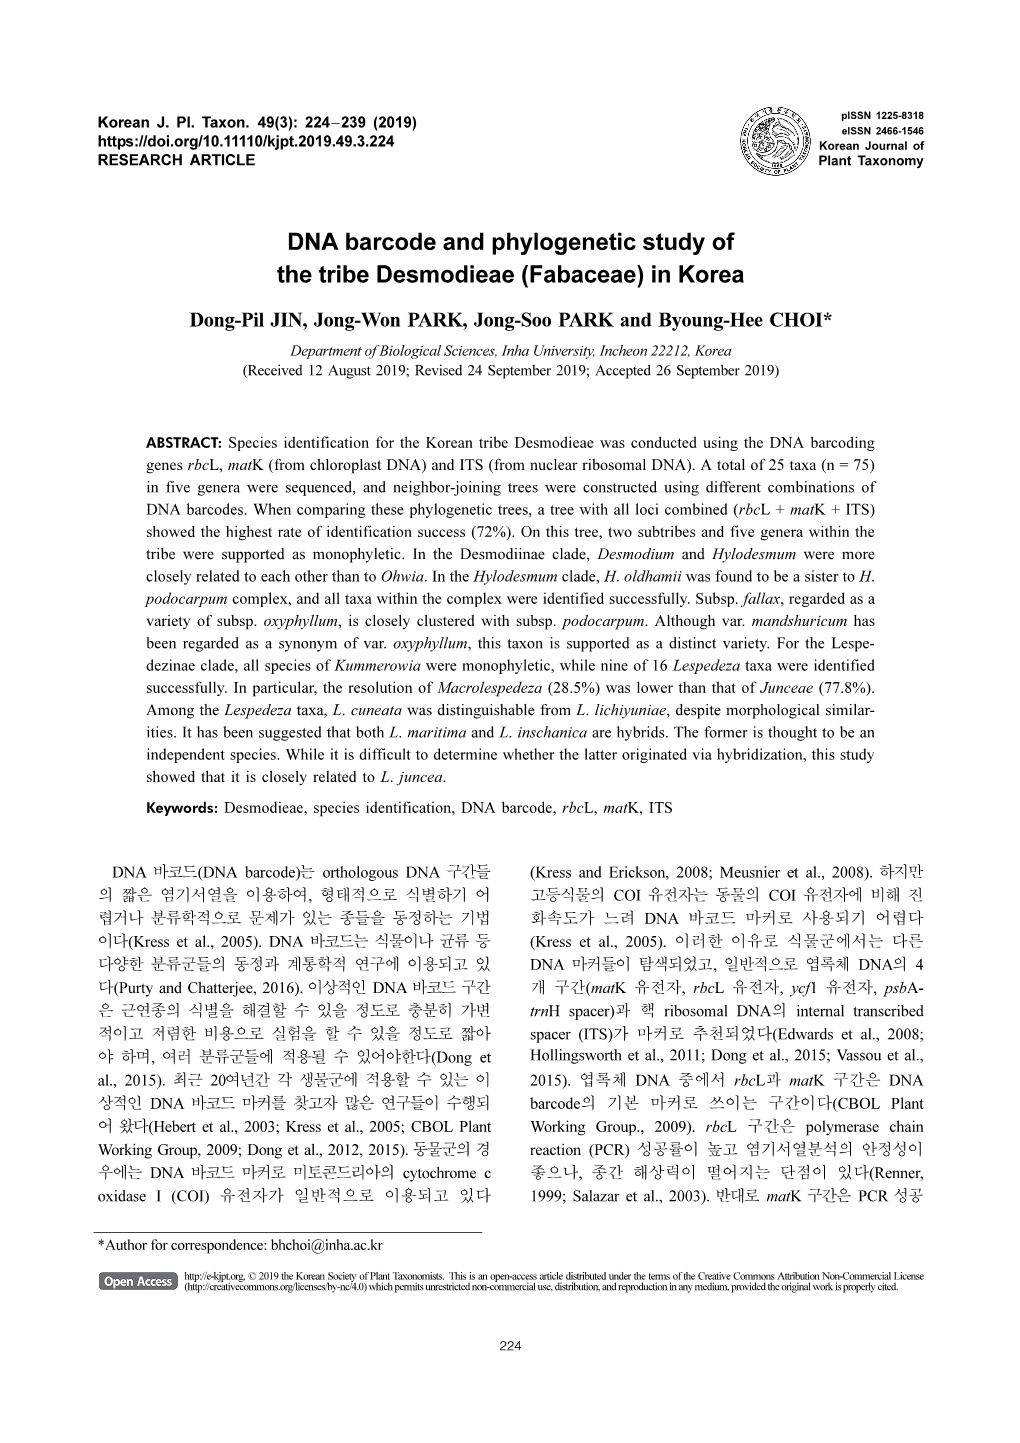 DNA Barcode and Phylogenetic Study of the Tribe Desmodieae (Fabaceae) in Korea